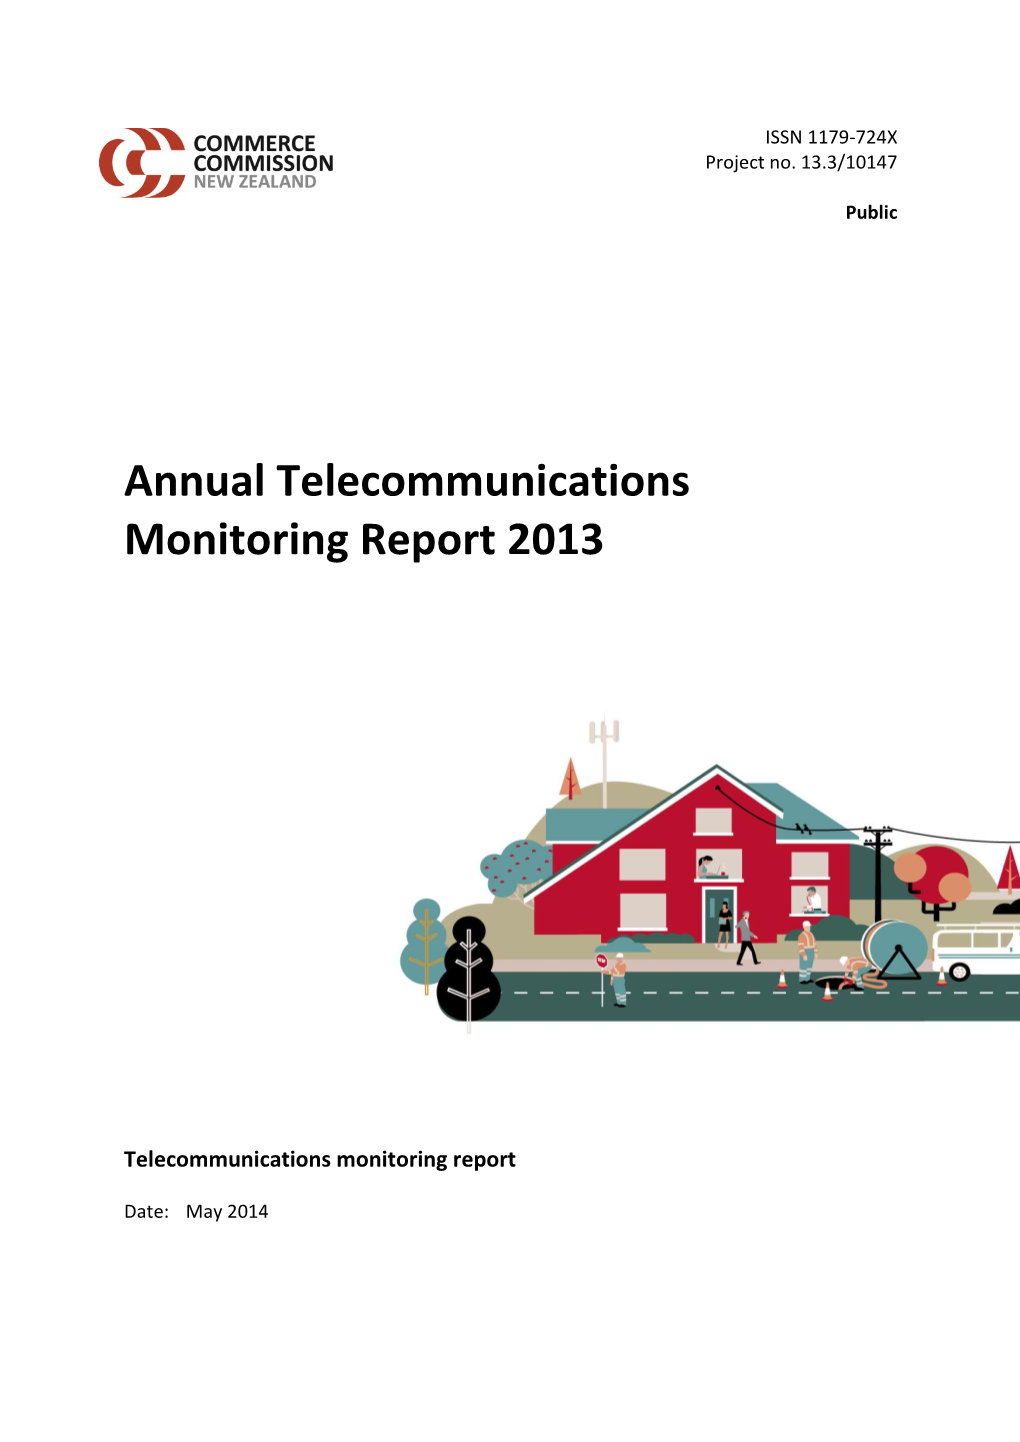 2013 Annual Telecommunications Monitoring Report